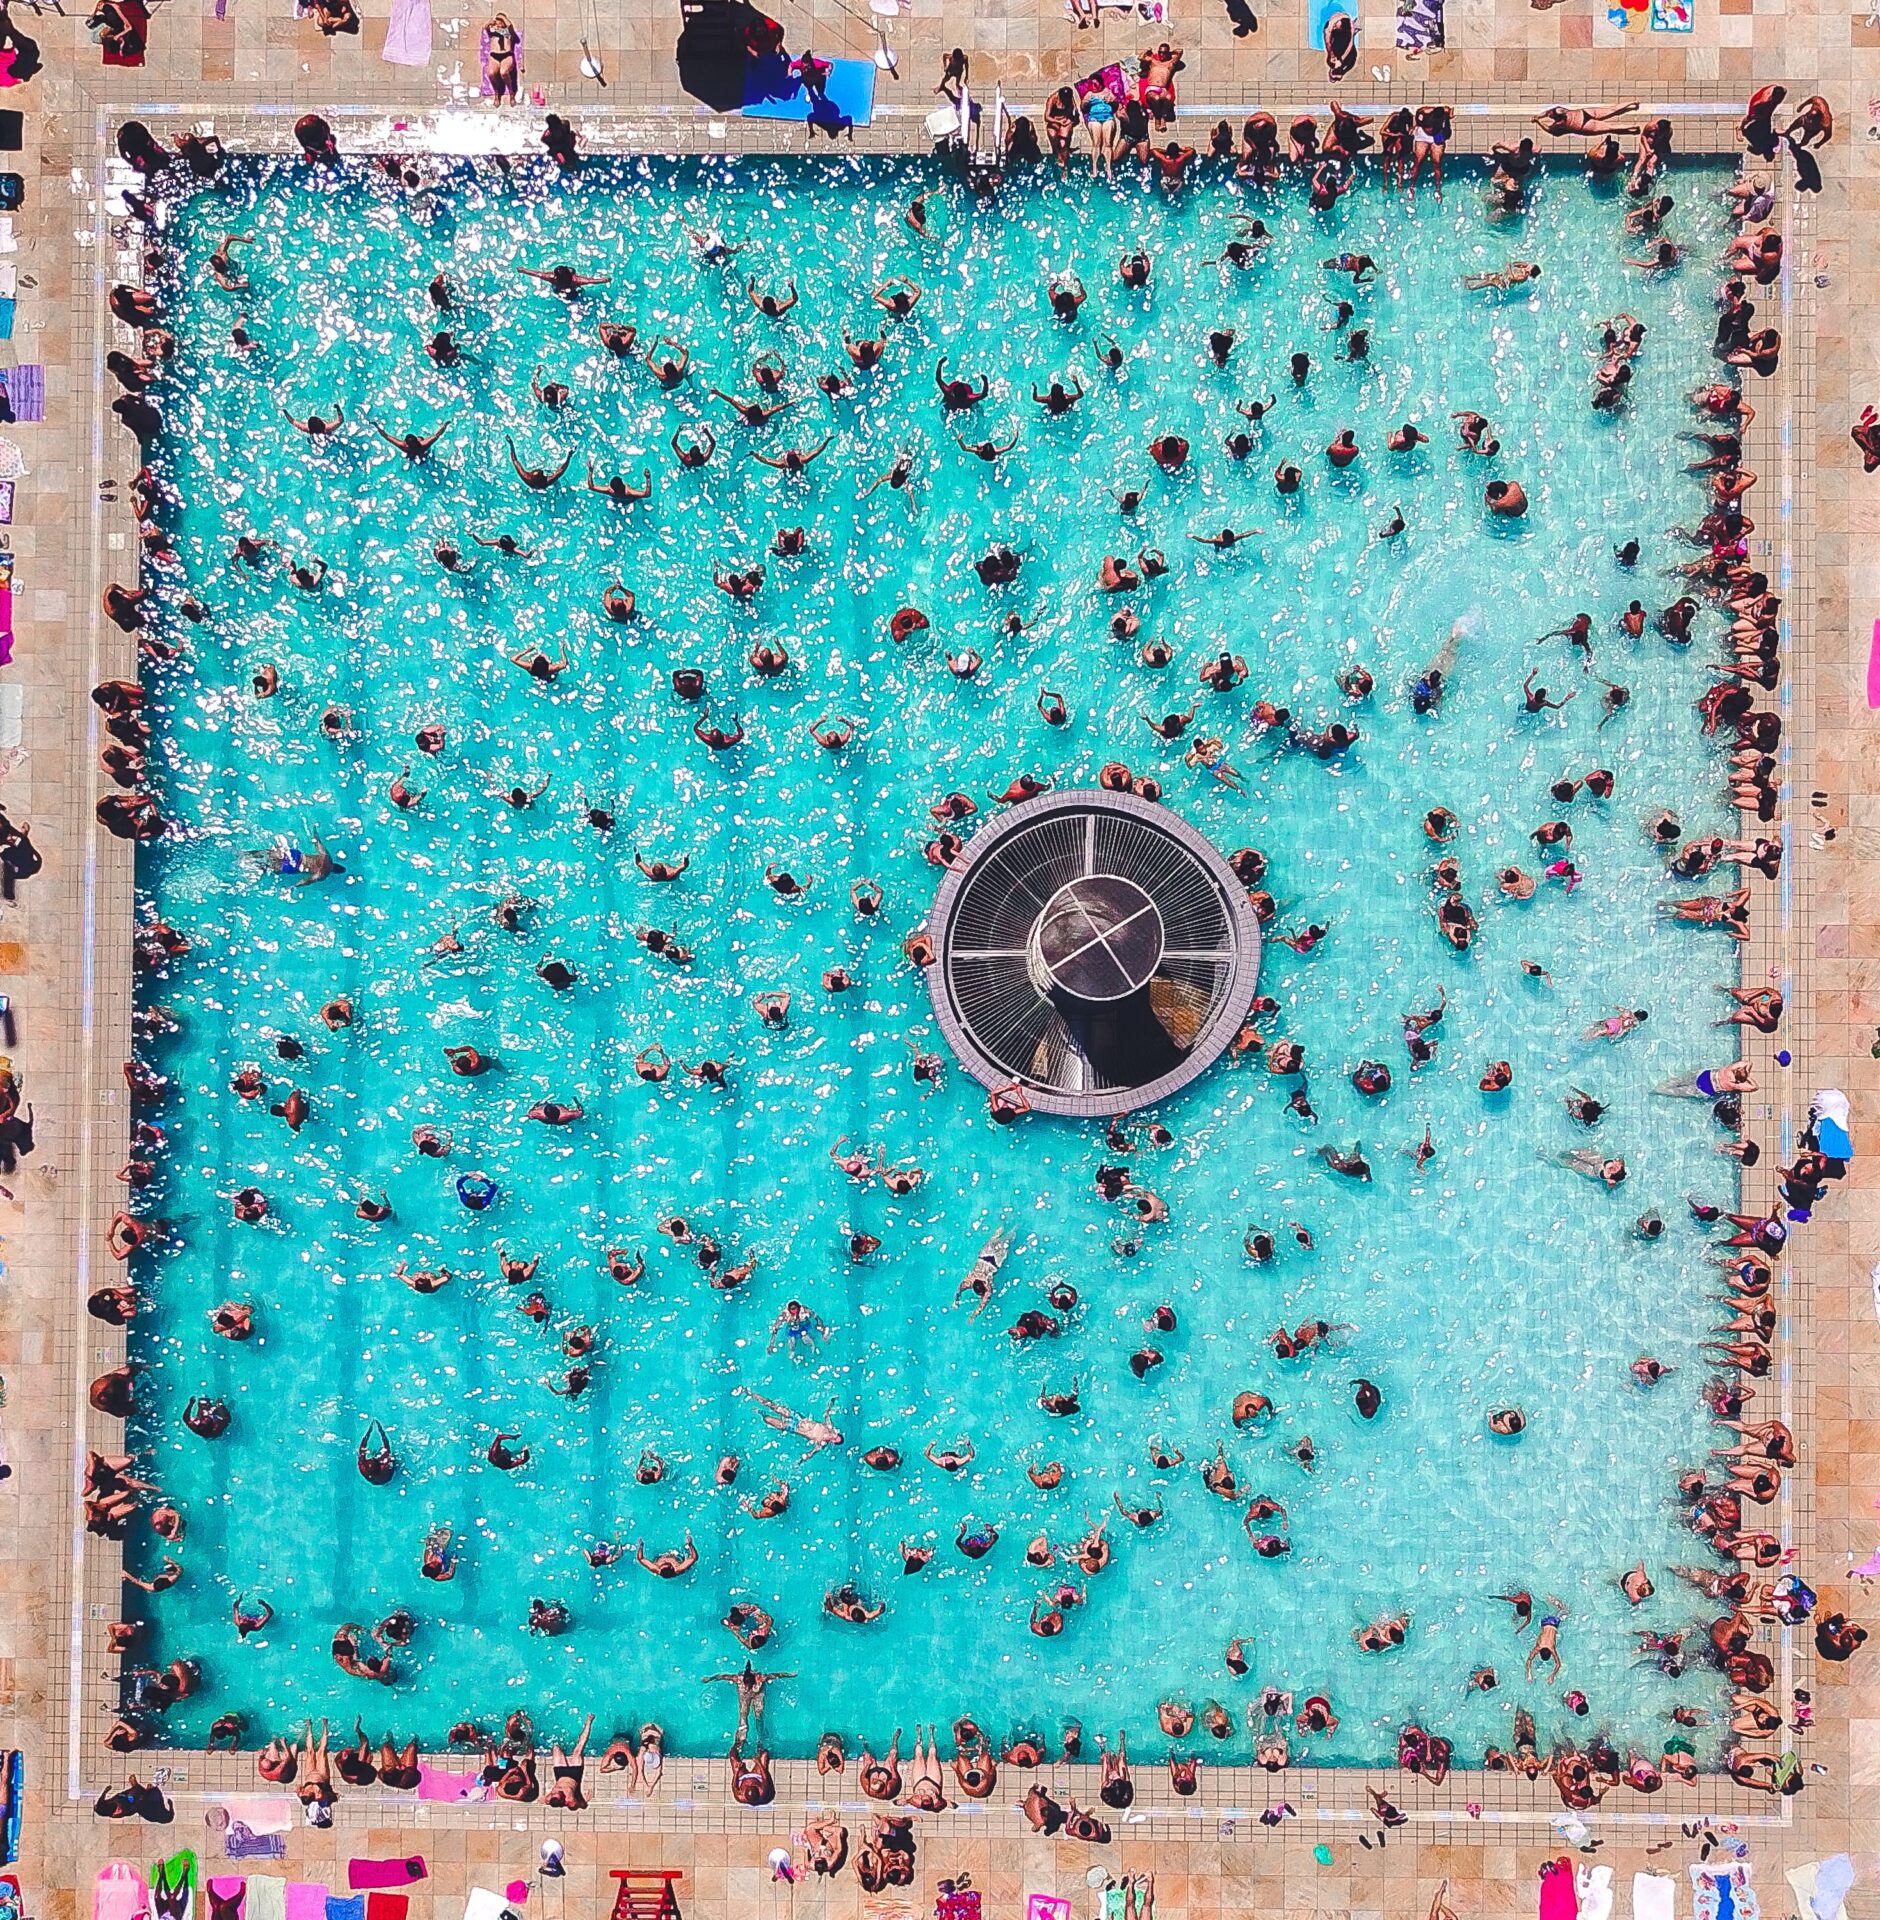 A crowded swimming pool (Photo by sergio souza from Pexels)